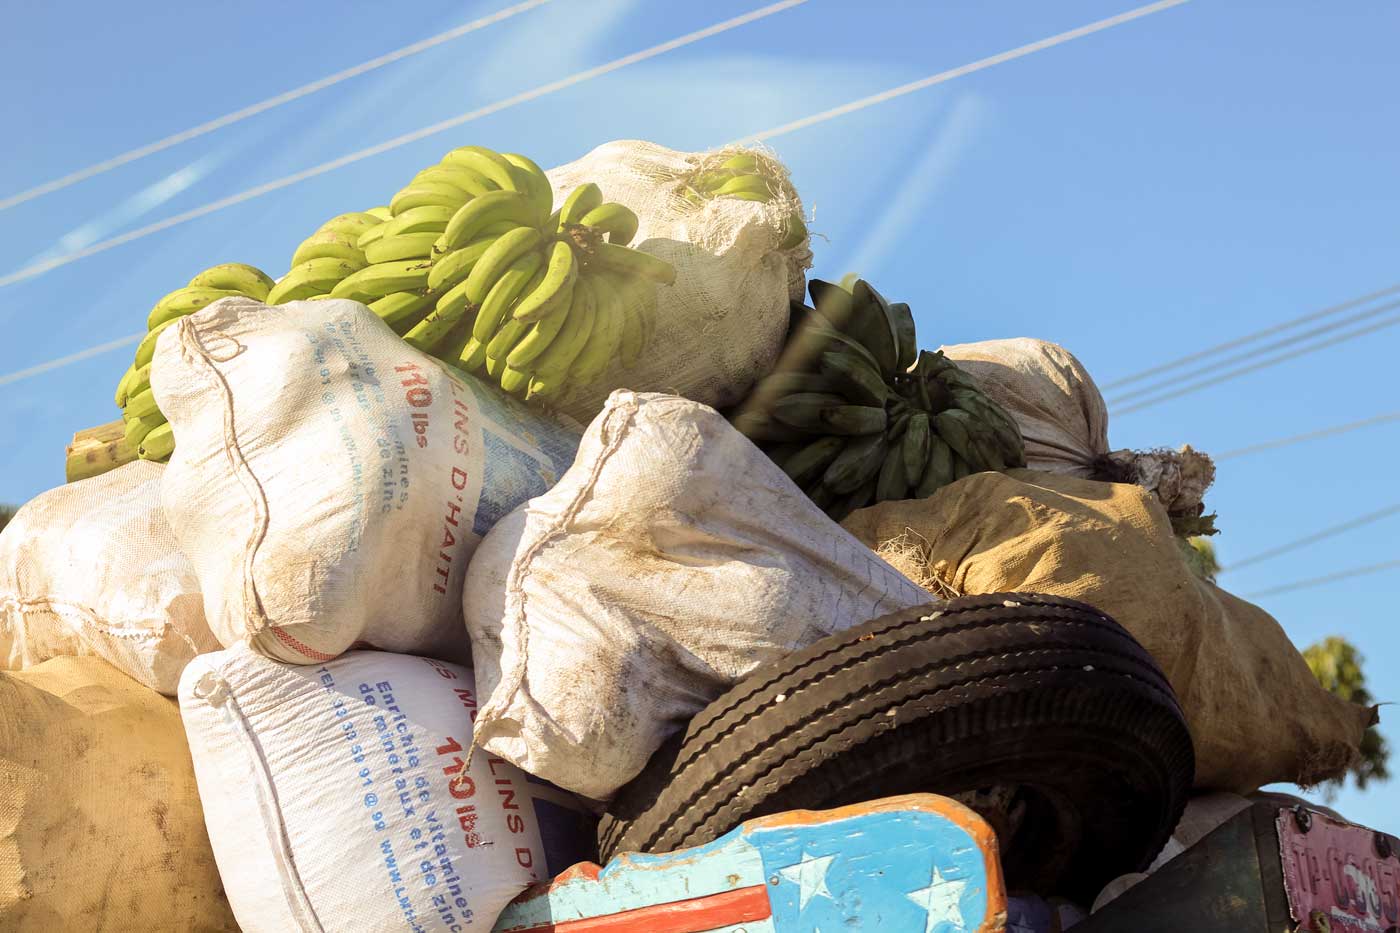 bags of haitian fruits and vegetables packed on top of bus